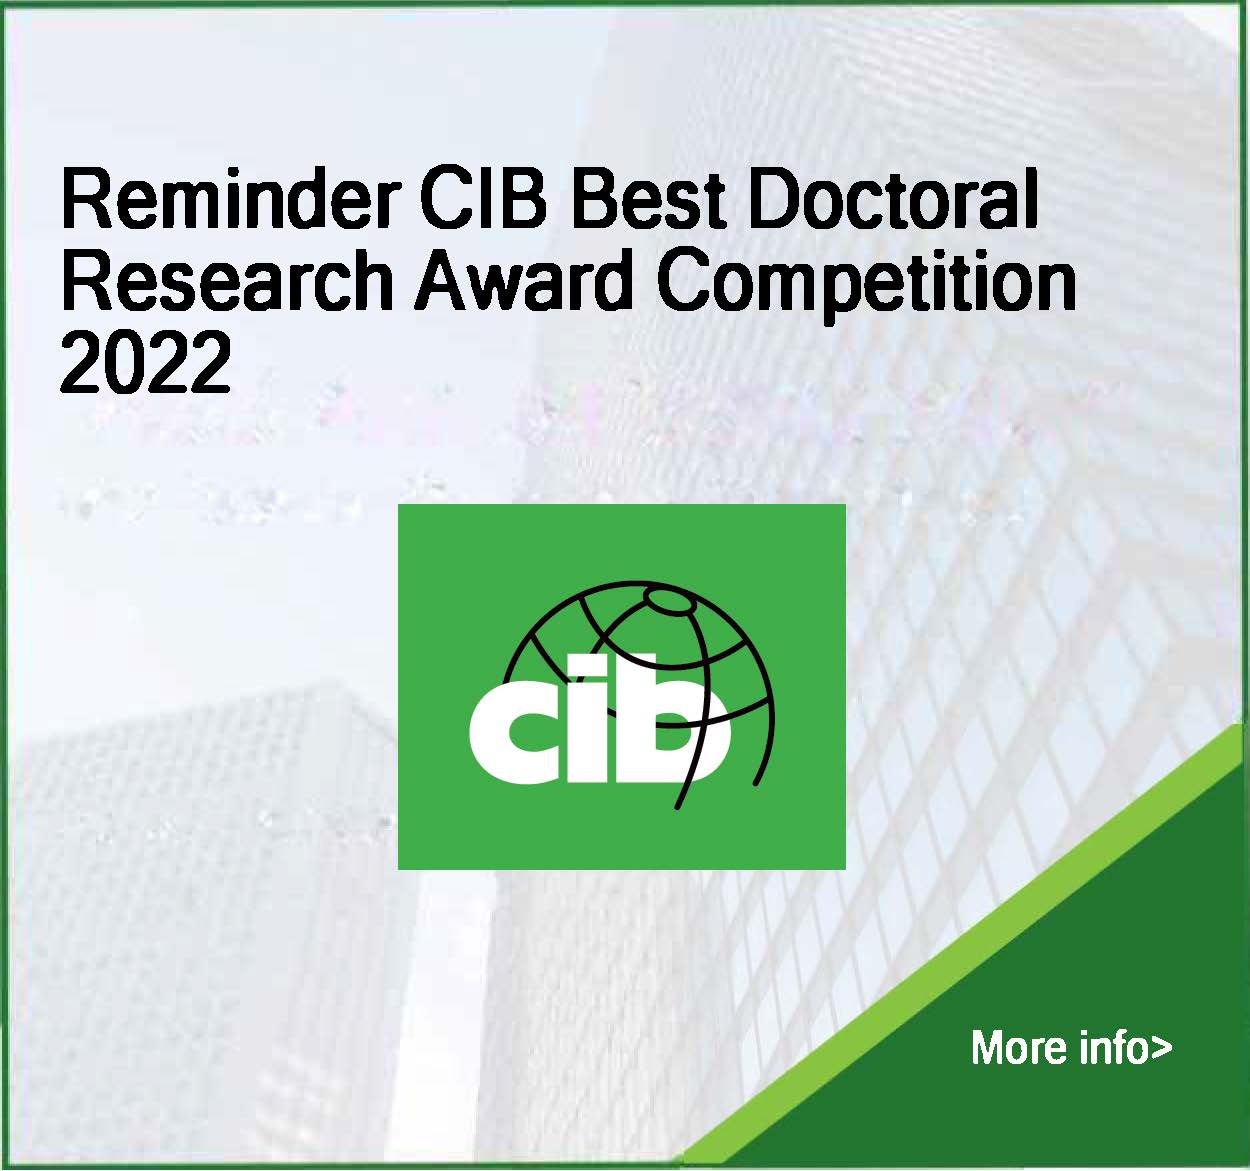 Reminder CIB Best Doctoral Research Award Competition 2022